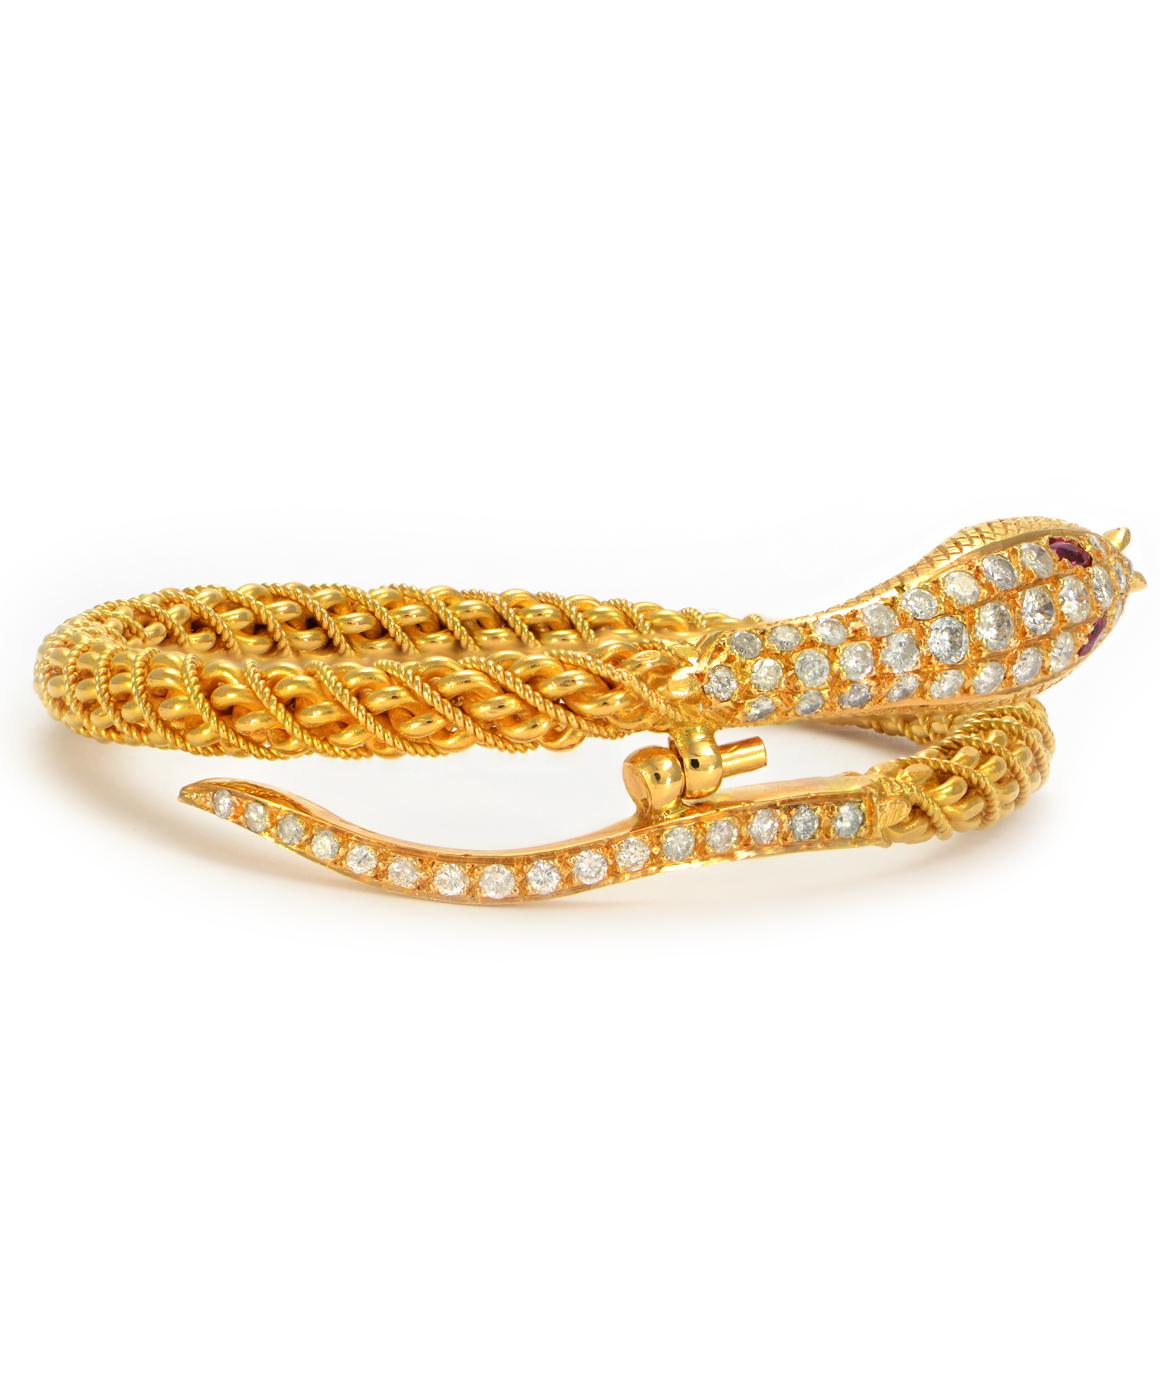 Excellent condition! This solid 22K yellow gold textured bangle features 46 genuine diamonds throughout the head and tail and two oval genuine ruby eyes. The diamonds are F-G in color and SI2-I1 in clarity. The bangle clasps at the head and tail.